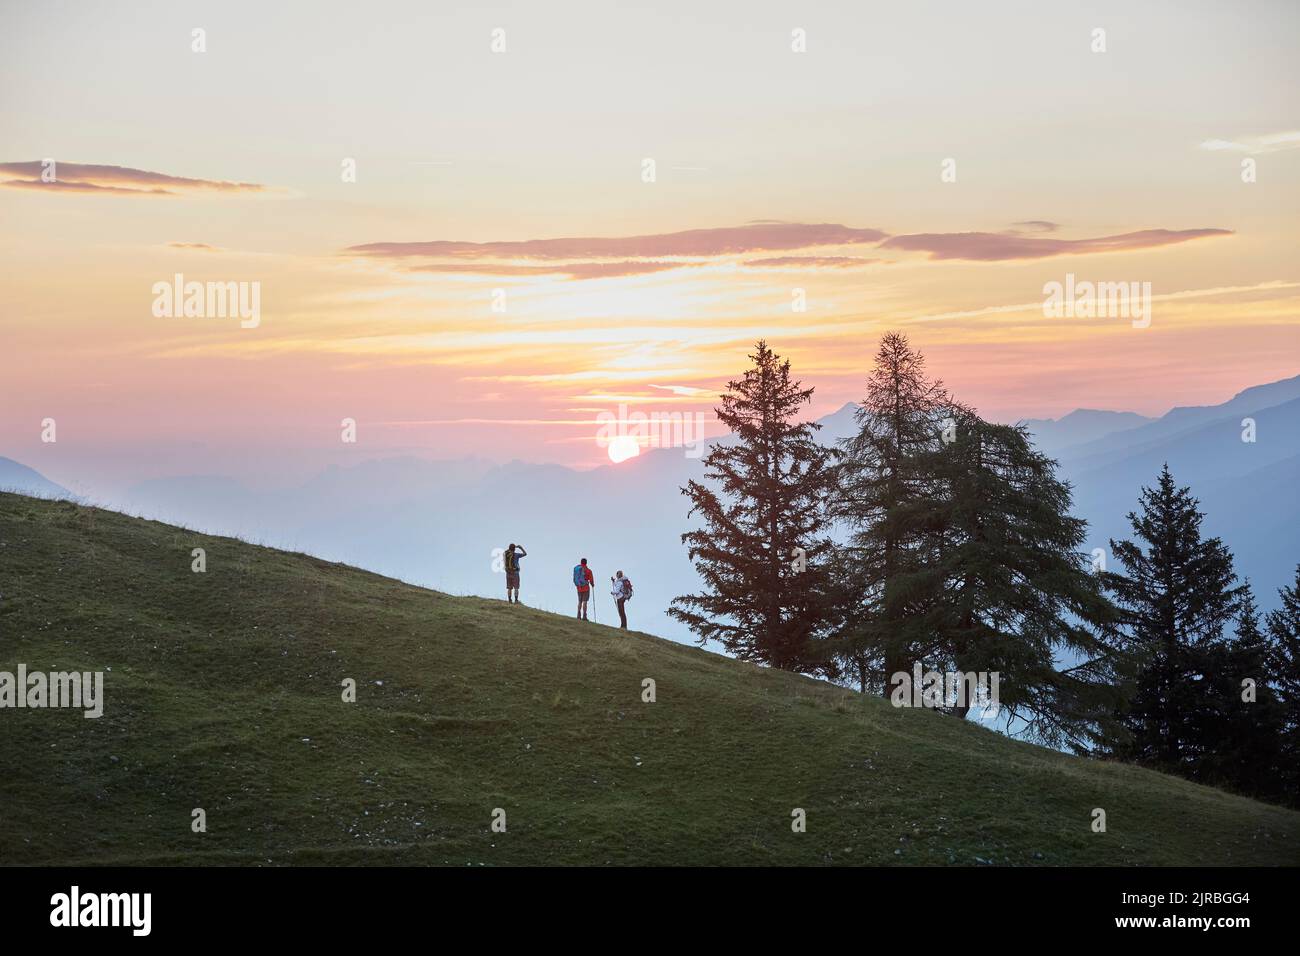 Hikers standing on mountain by trees, Mutters, Tyrol, Austria Stock Photo